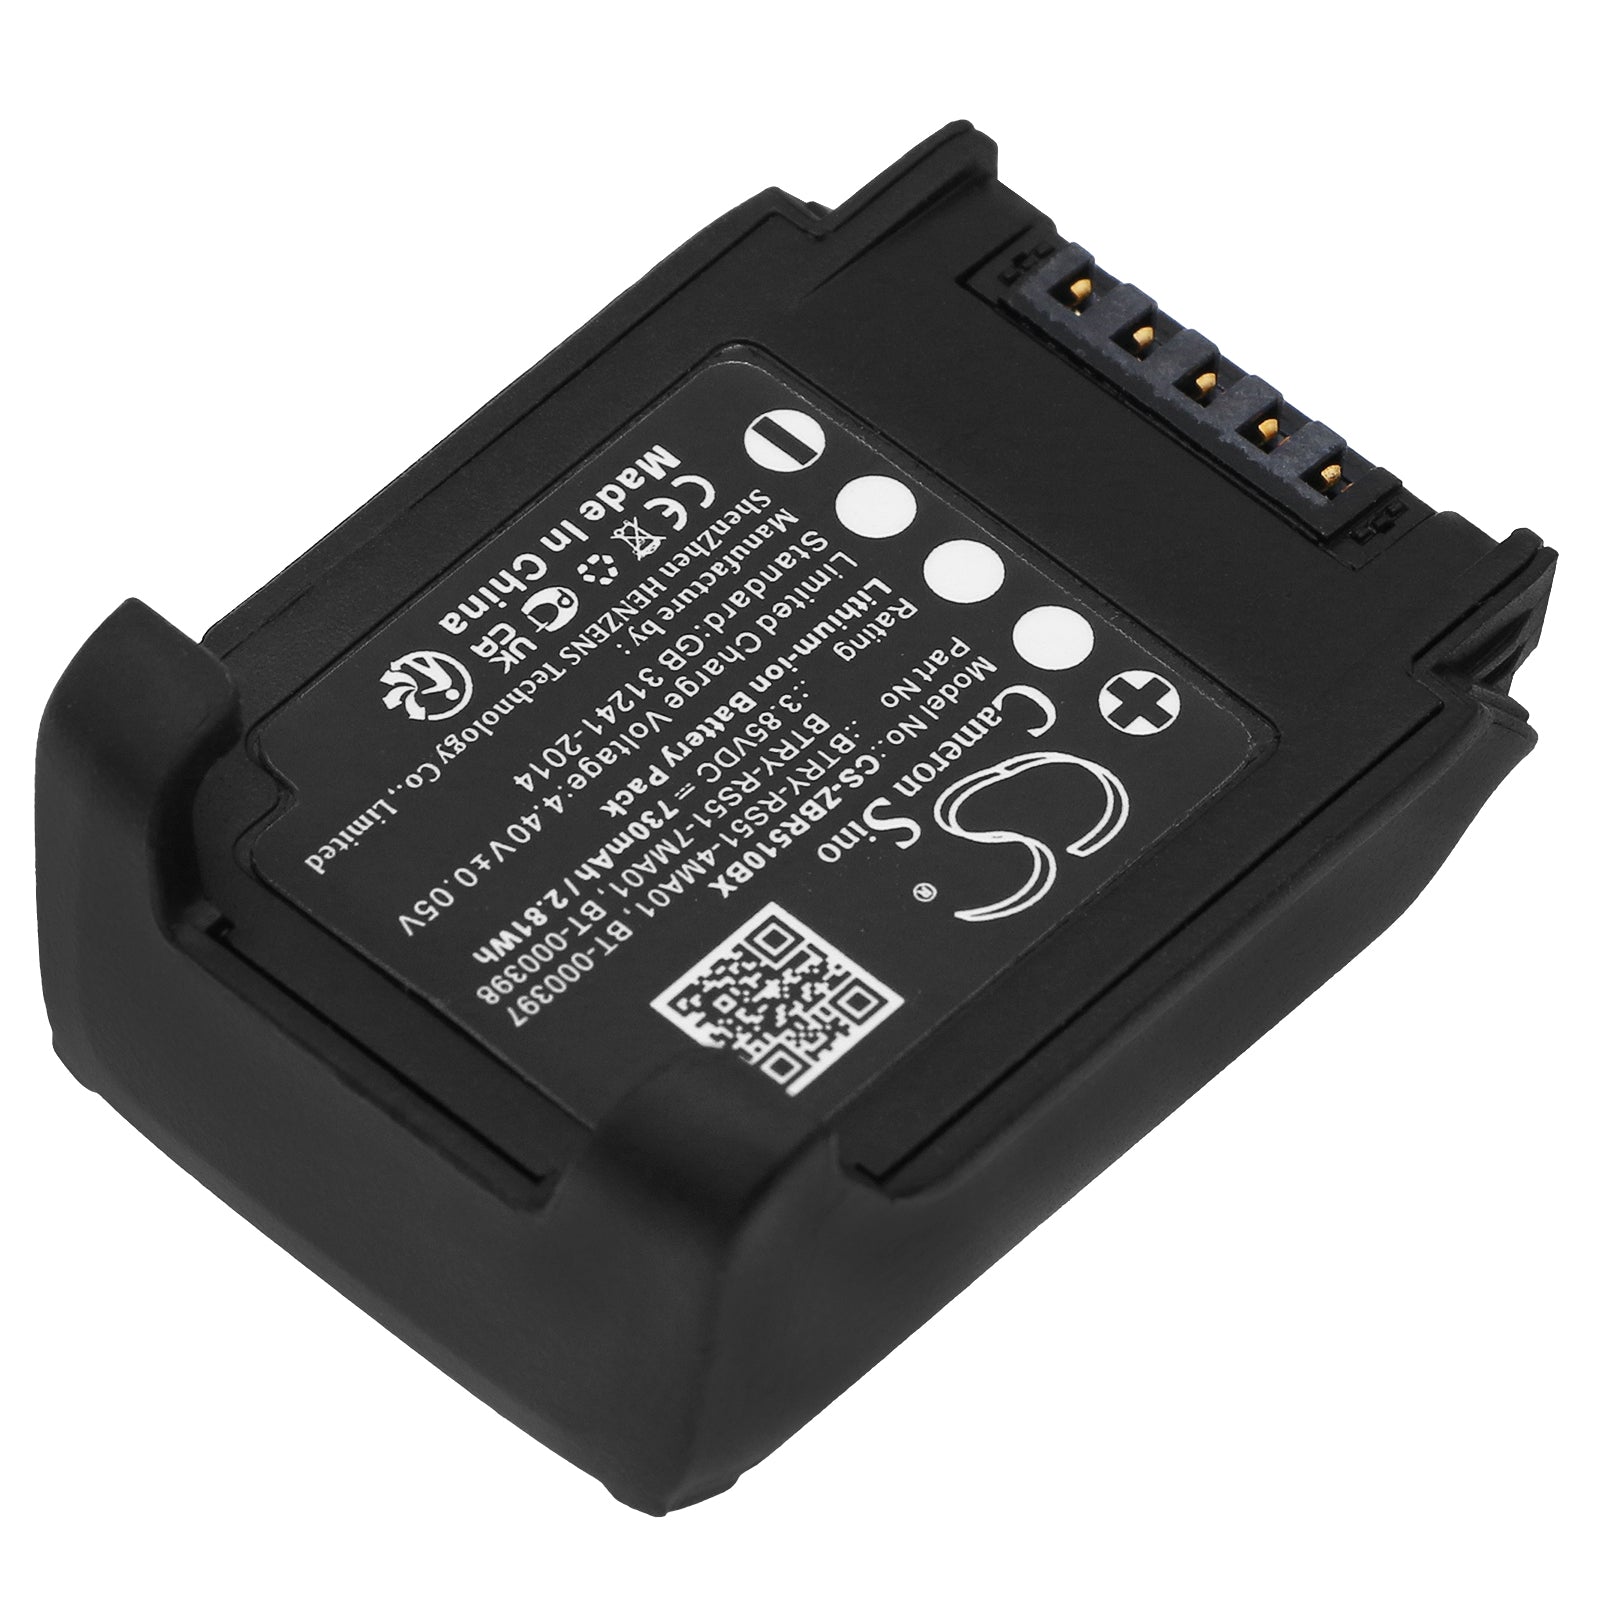 730mAh BTRY-RS51-4MA01, BTRY-RS51-7MA01, BT-000397, BT-000398 High Capacity Battery for Zebra RS51, RS5100 Ring Scanner, RS5100 2D Bluetooth Ring Scanner-SMAVtronics